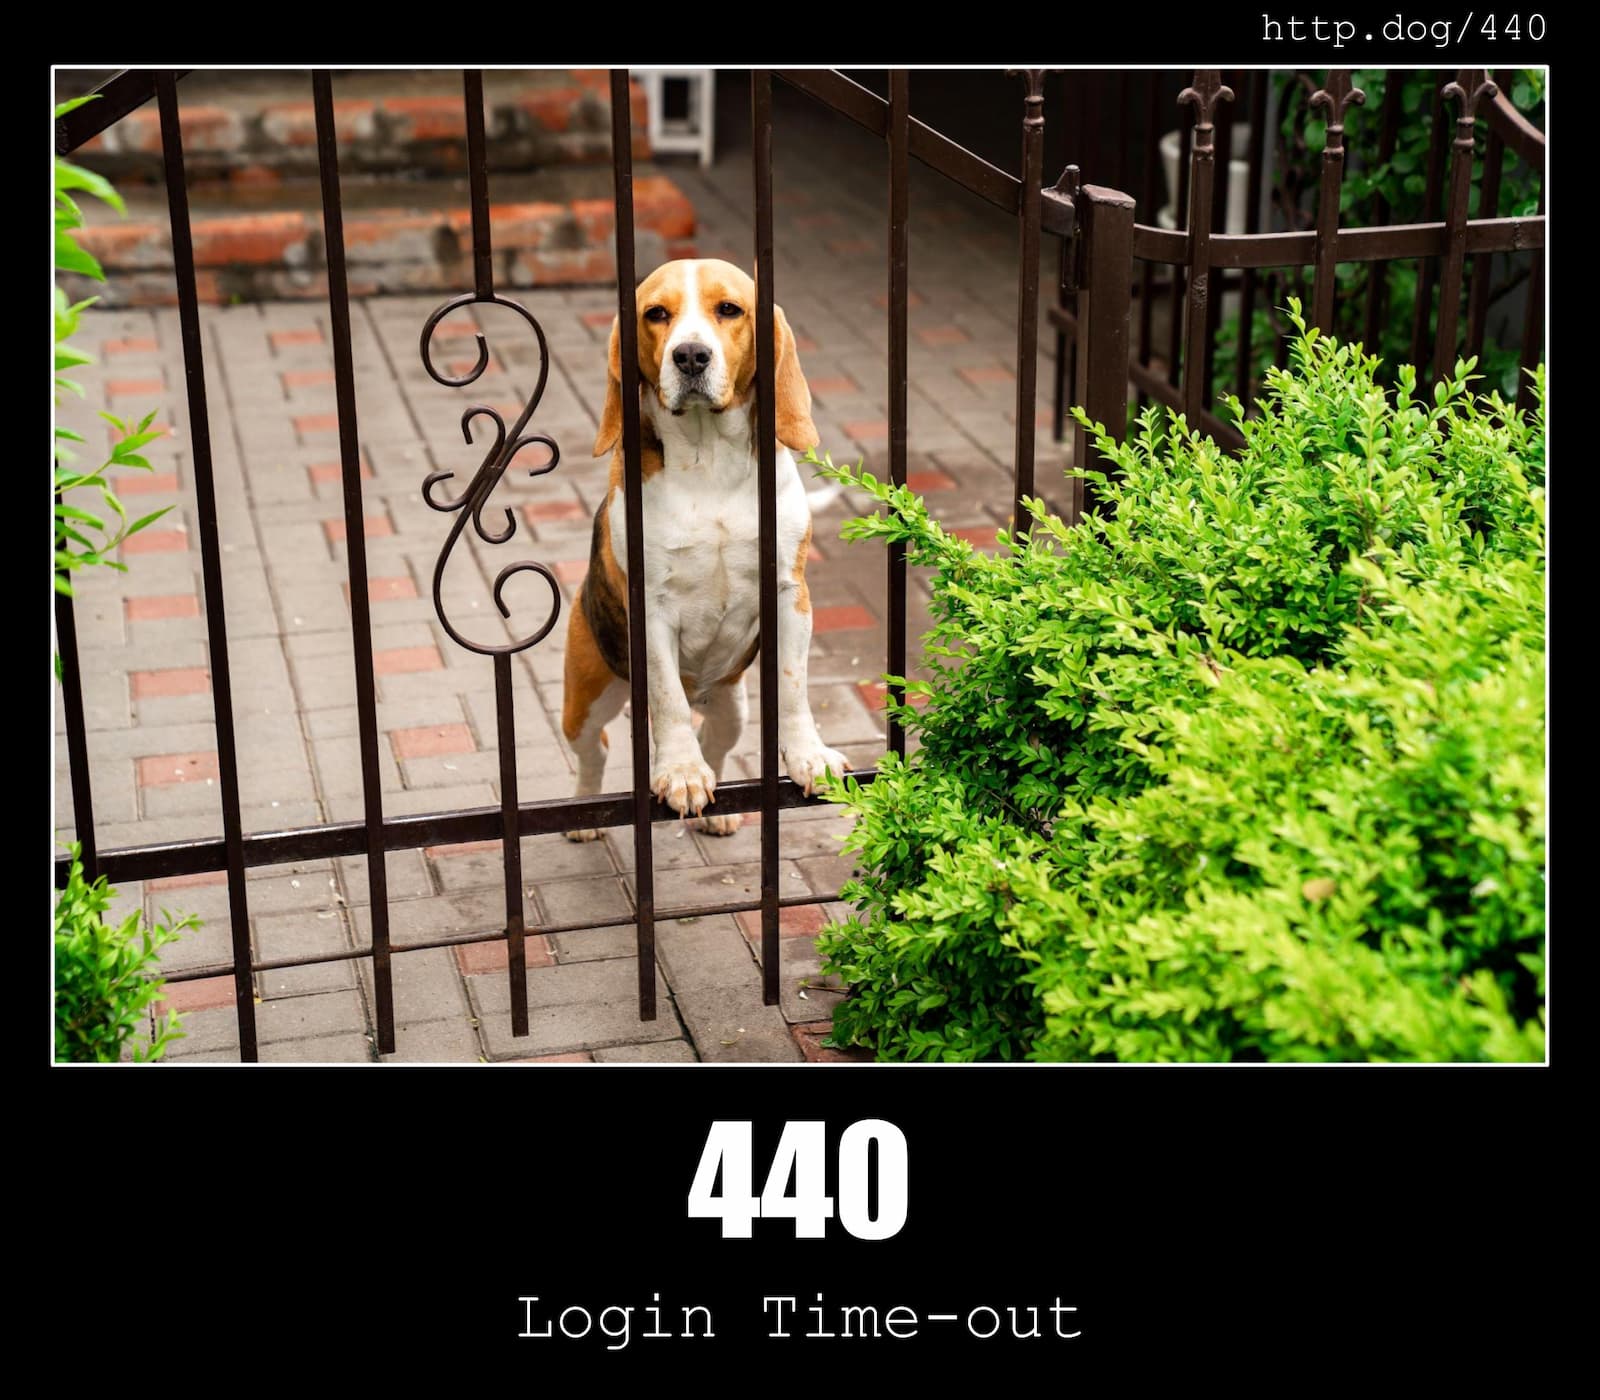 HTTP Status Code 440 Login Time-out & Dogs